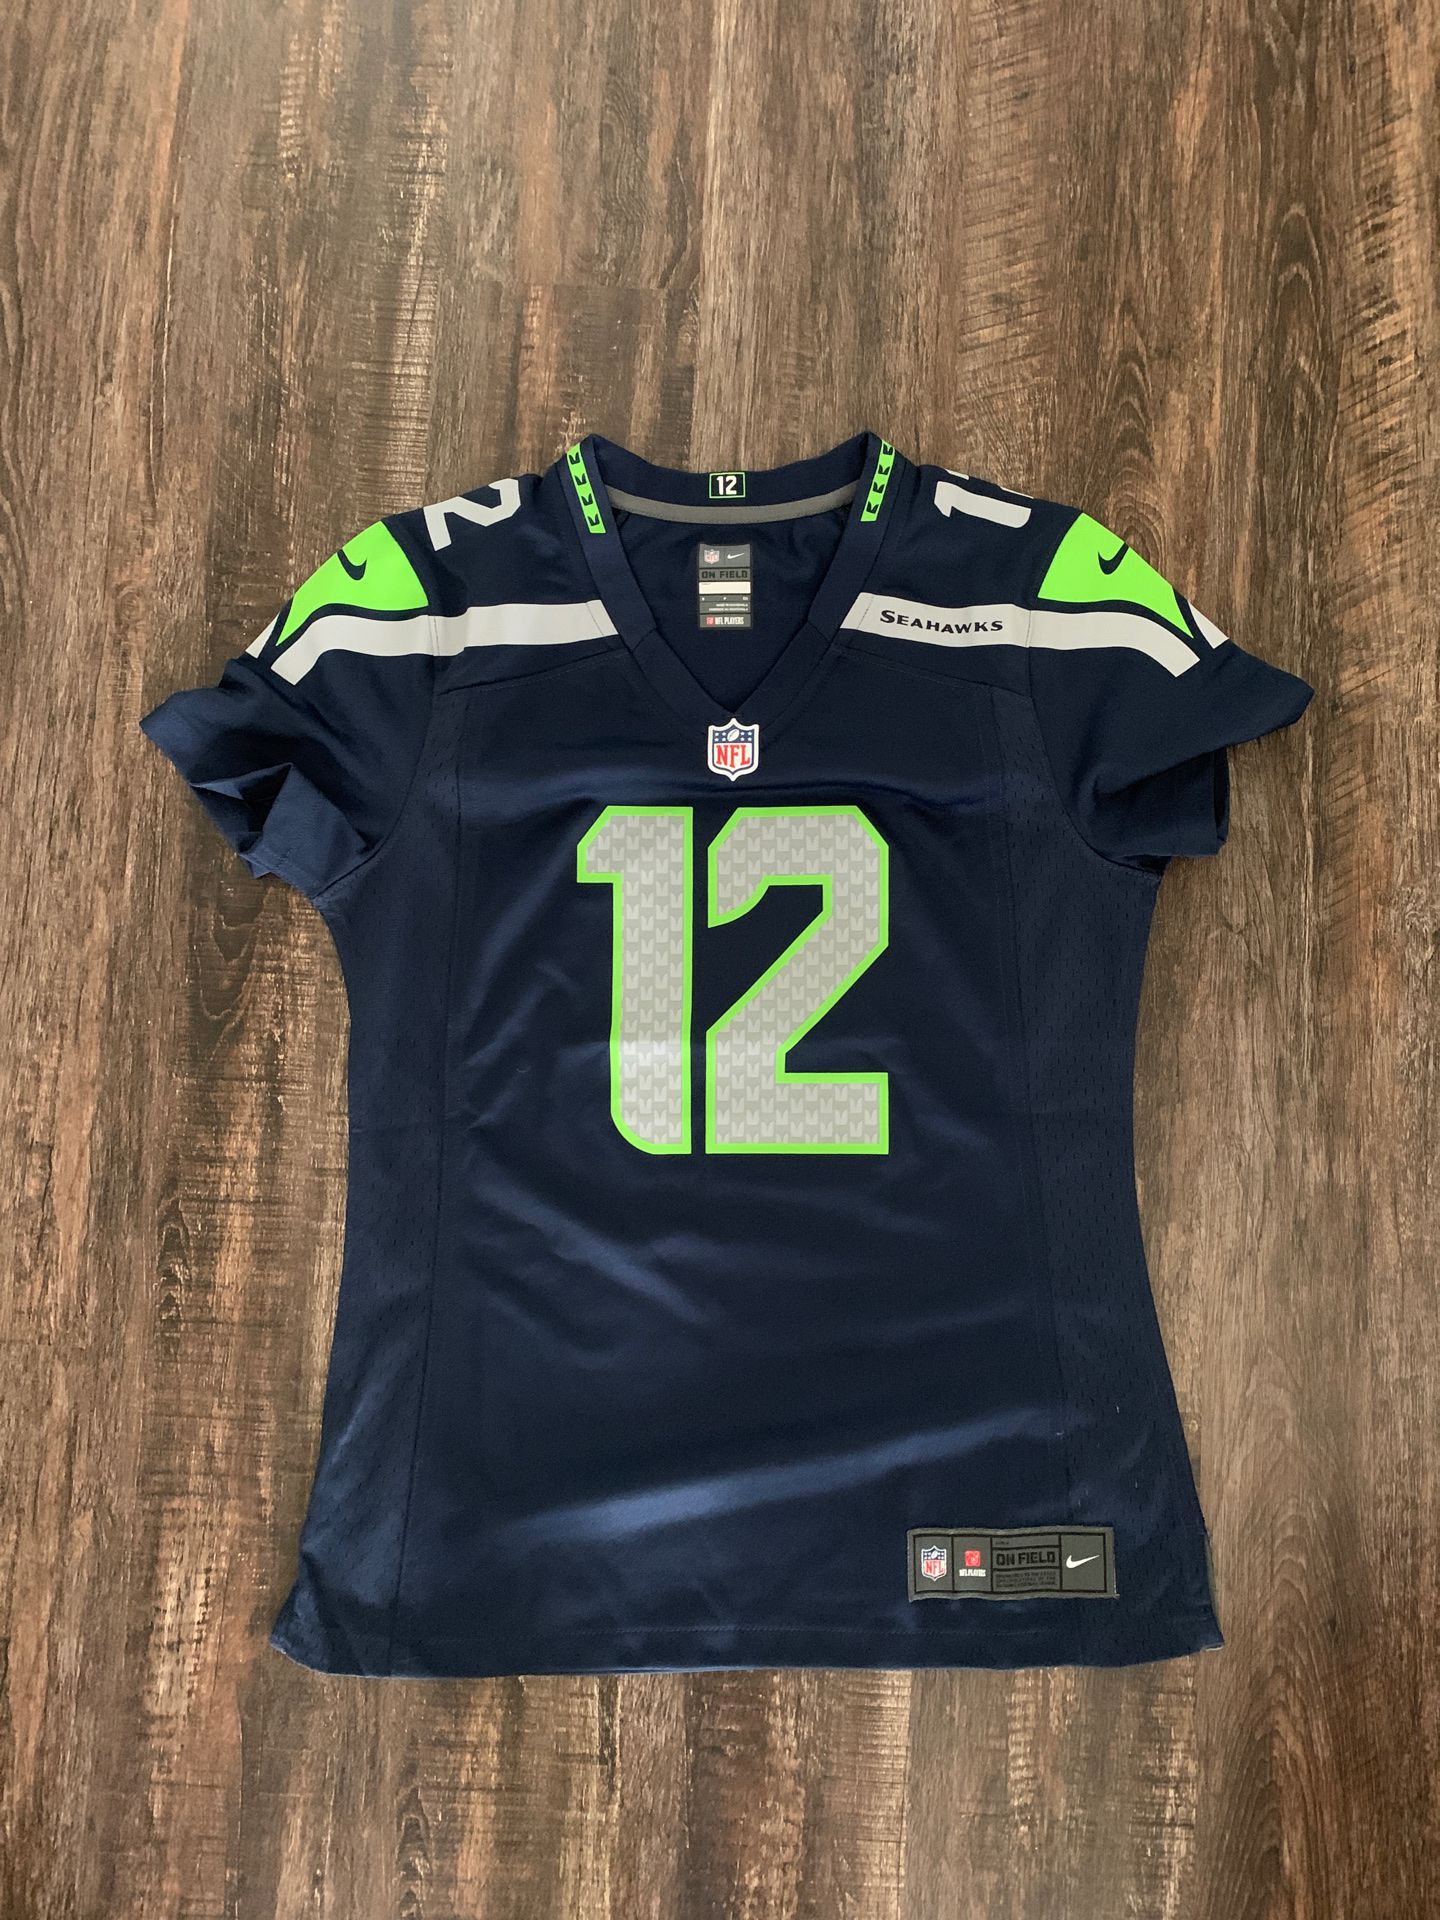 Seahawk jersey for Sale in Hillsboro, OR - OfferUp